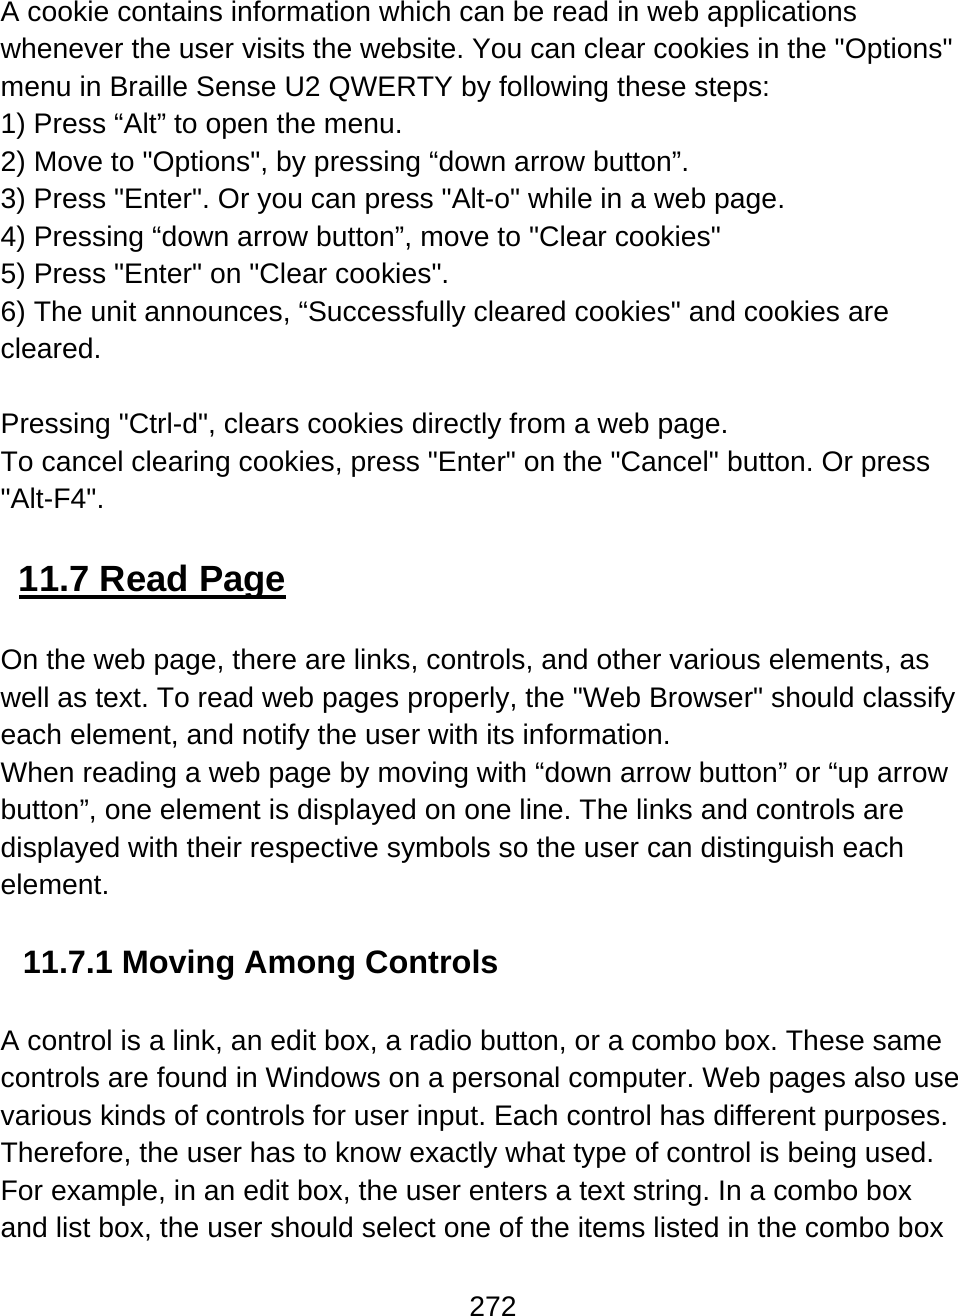 272  A cookie contains information which can be read in web applications whenever the user visits the website. You can clear cookies in the &quot;Options&quot; menu in Braille Sense U2 QWERTY by following these steps: 1) Press “Alt” to open the menu. 2) Move to &quot;Options&quot;, by pressing “down arrow button”. 3) Press &quot;Enter&quot;. Or you can press &quot;Alt-o&quot; while in a web page. 4) Pressing “down arrow button”, move to &quot;Clear cookies&quot; 5) Press &quot;Enter&quot; on &quot;Clear cookies&quot;. 6) The unit announces, “Successfully cleared cookies&quot; and cookies are cleared.  Pressing &quot;Ctrl-d&quot;, clears cookies directly from a web page. To cancel clearing cookies, press &quot;Enter&quot; on the &quot;Cancel&quot; button. Or press &quot;Alt-F4&quot;.   11.7 Read Page  On the web page, there are links, controls, and other various elements, as well as text. To read web pages properly, the &quot;Web Browser&quot; should classify each element, and notify the user with its information. When reading a web page by moving with “down arrow button” or “up arrow button”, one element is displayed on one line. The links and controls are displayed with their respective symbols so the user can distinguish each element.  11.7.1 Moving Among Controls  A control is a link, an edit box, a radio button, or a combo box. These same controls are found in Windows on a personal computer. Web pages also use various kinds of controls for user input. Each control has different purposes. Therefore, the user has to know exactly what type of control is being used. For example, in an edit box, the user enters a text string. In a combo box and list box, the user should select one of the items listed in the combo box 